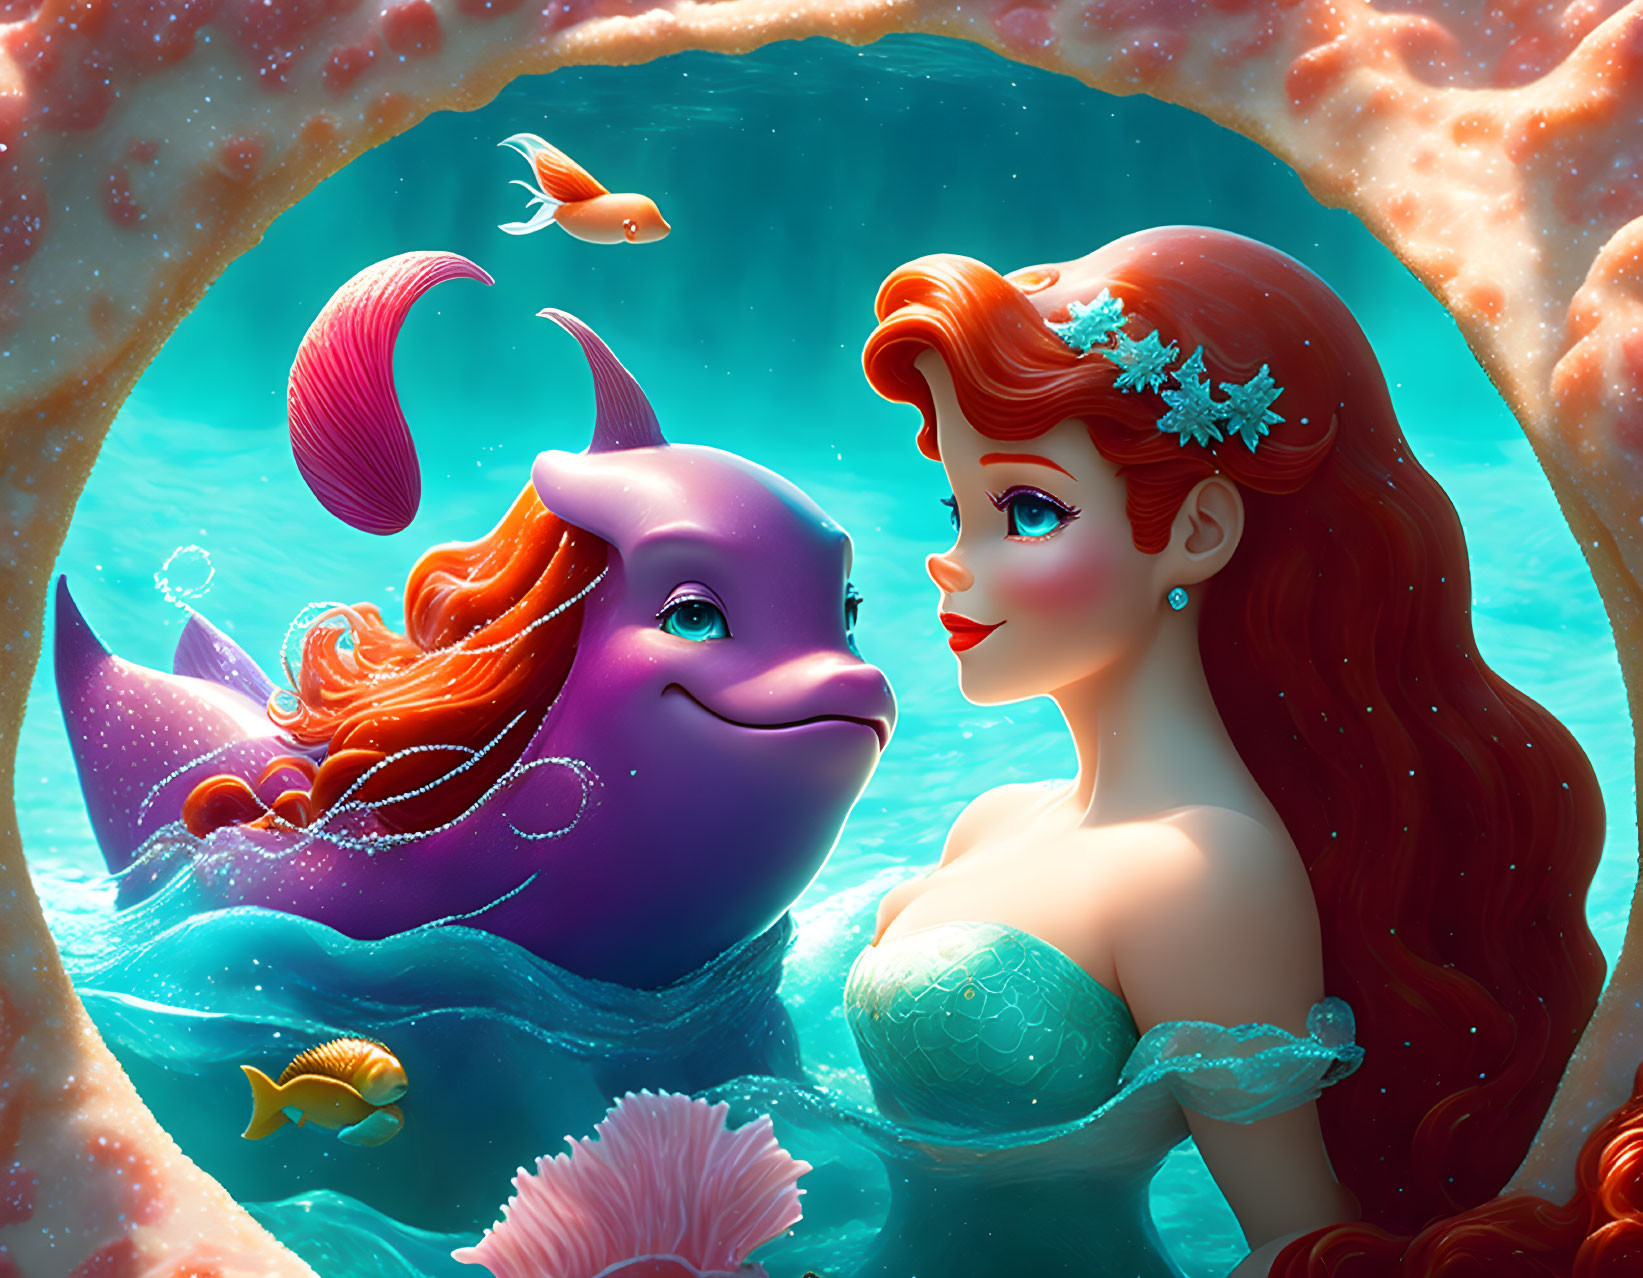 Red-haired animated mermaid with green tail and purple dolphin underwater.